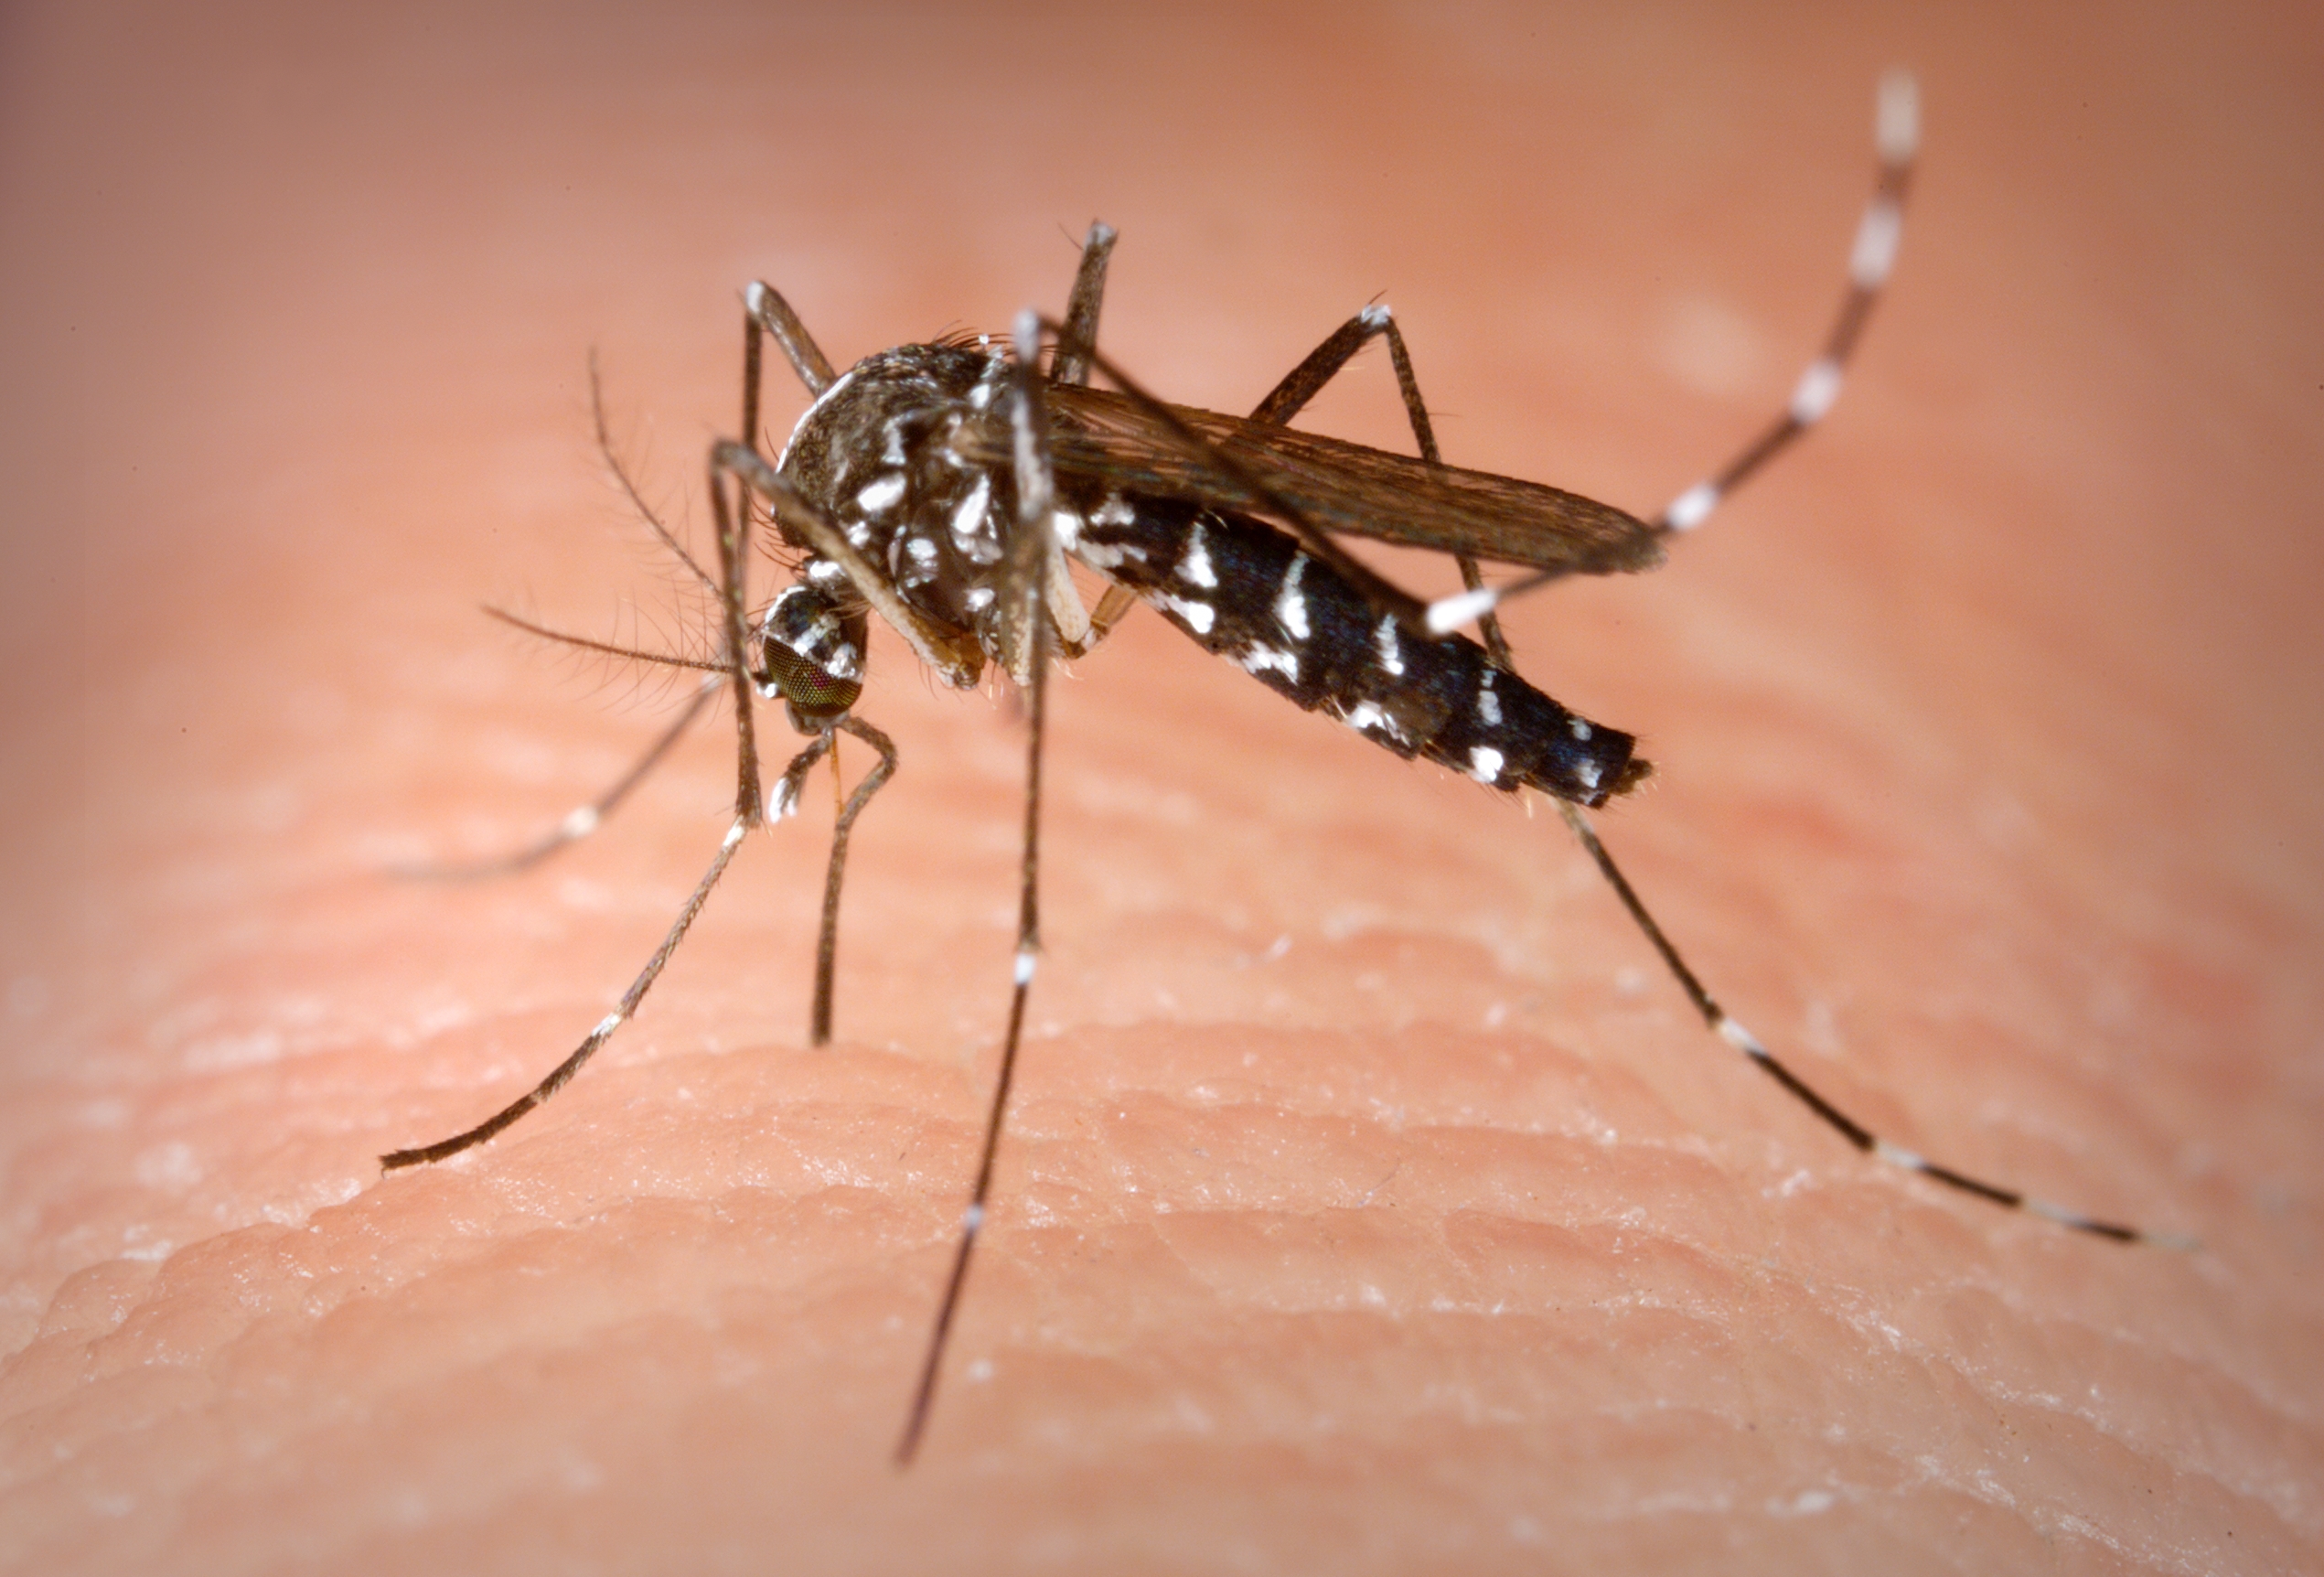 The Montgomery County Public Health District has reported the first case of West Nile Virus of 2018.